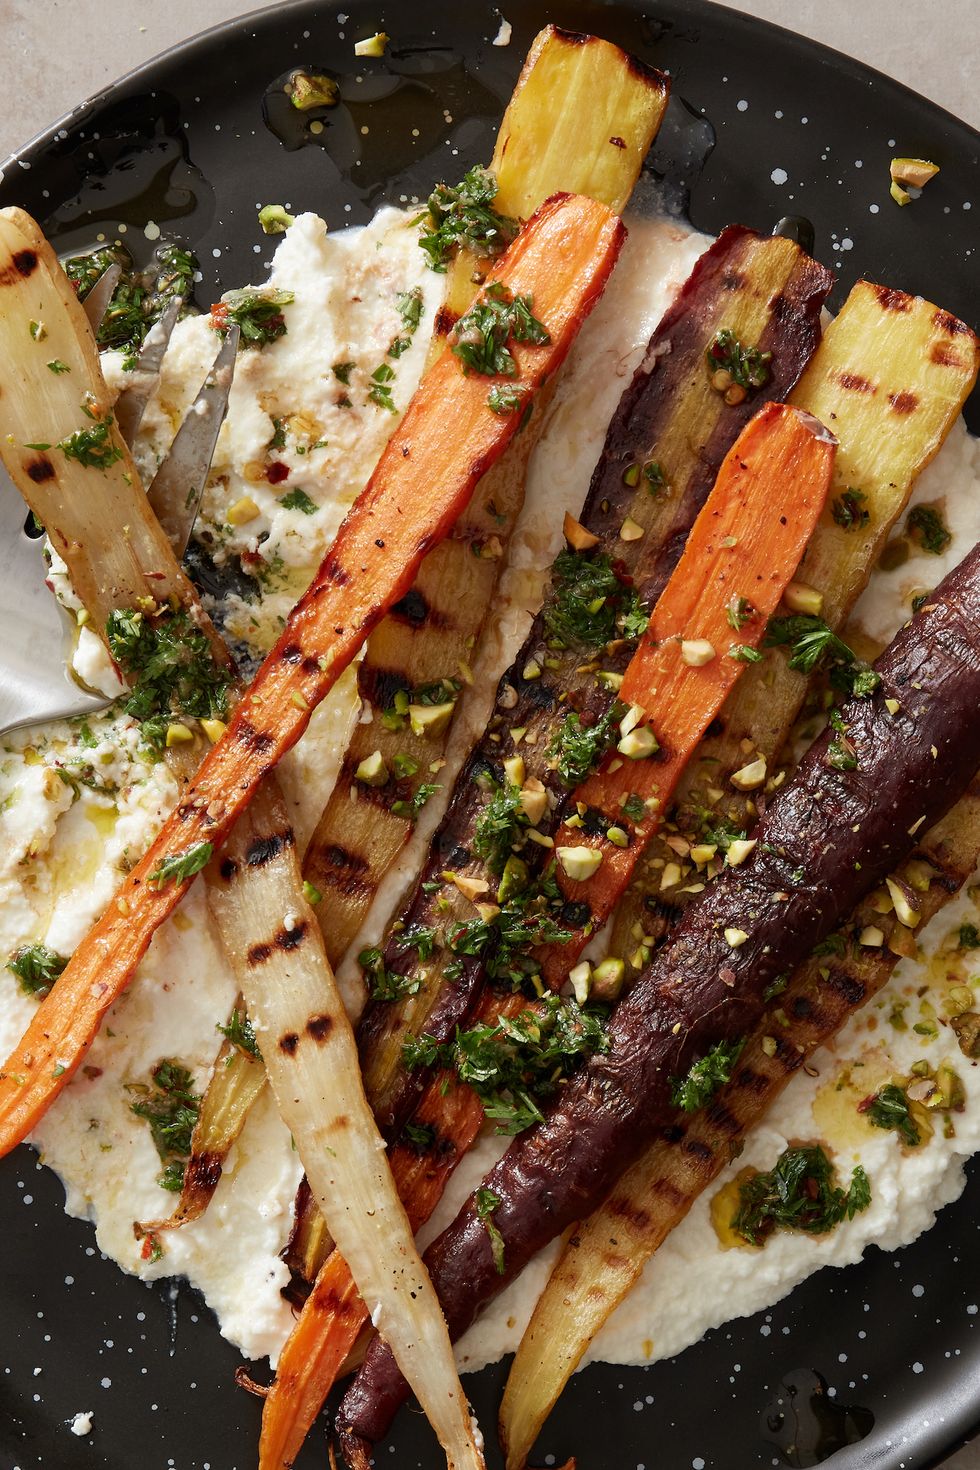 grilled carrots with chimichurri and ricotta